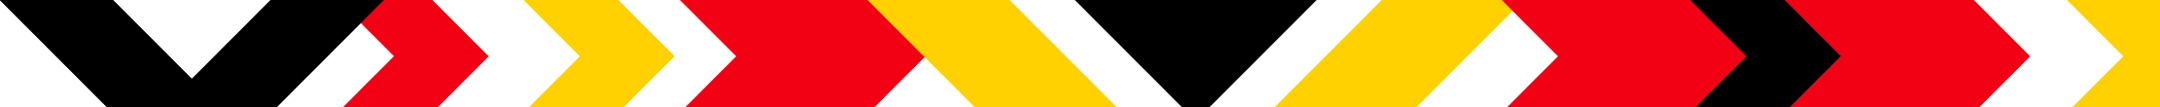 Design element of red, white and yellow arrows